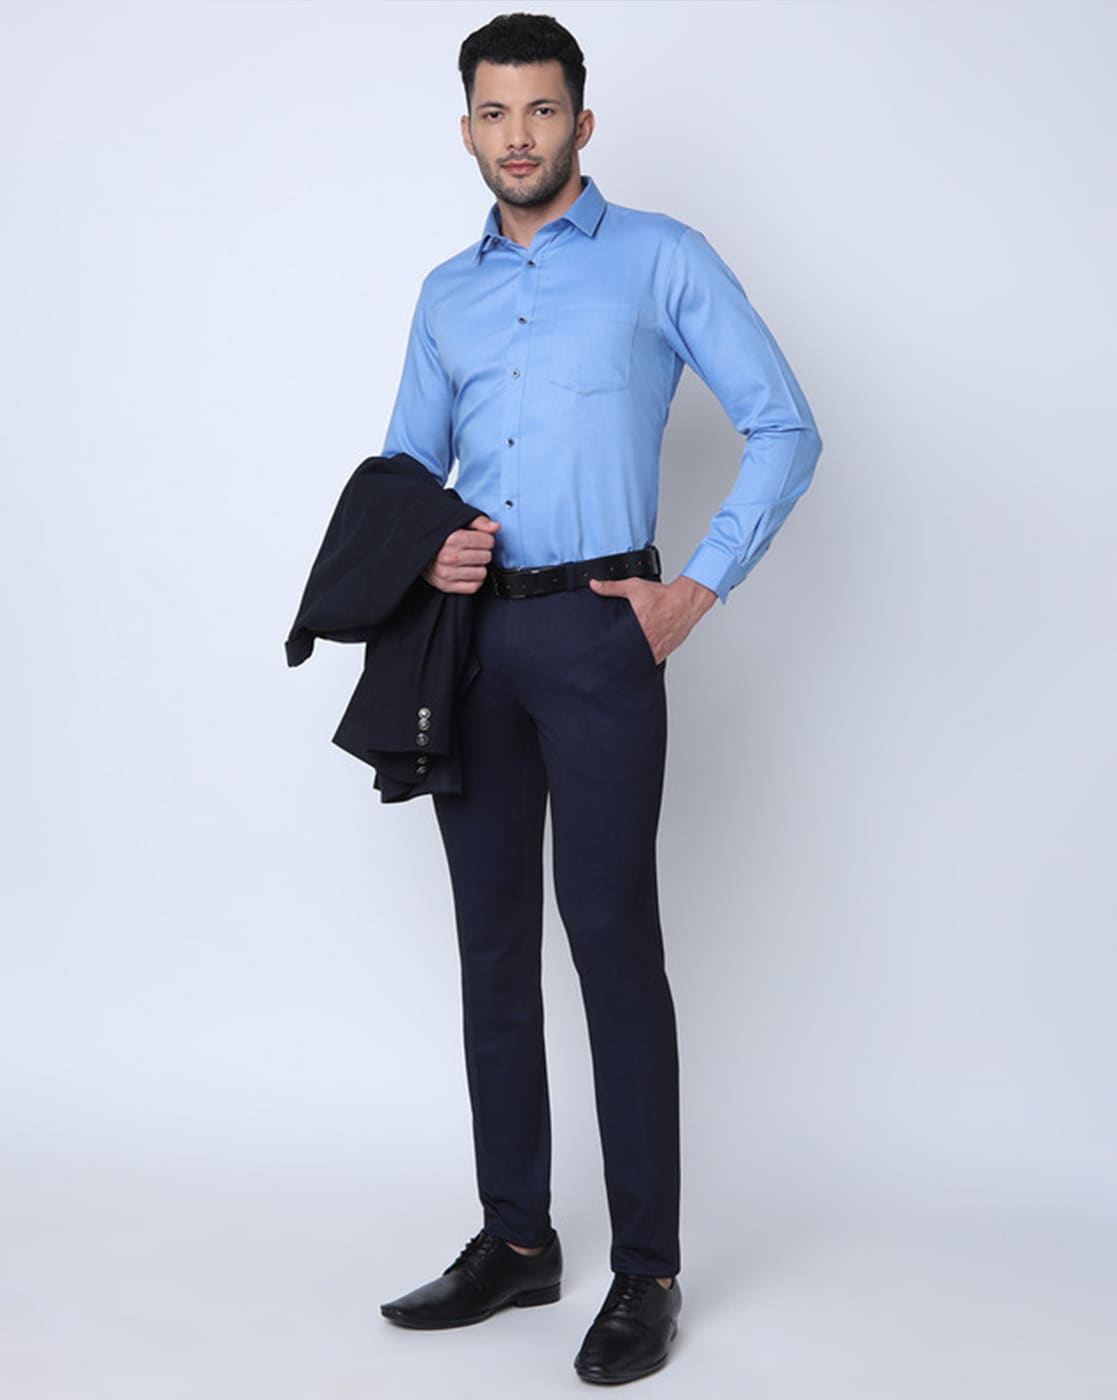 Oxemberg Trousers - Buy Oxemberg Pants & Trouser Online in India